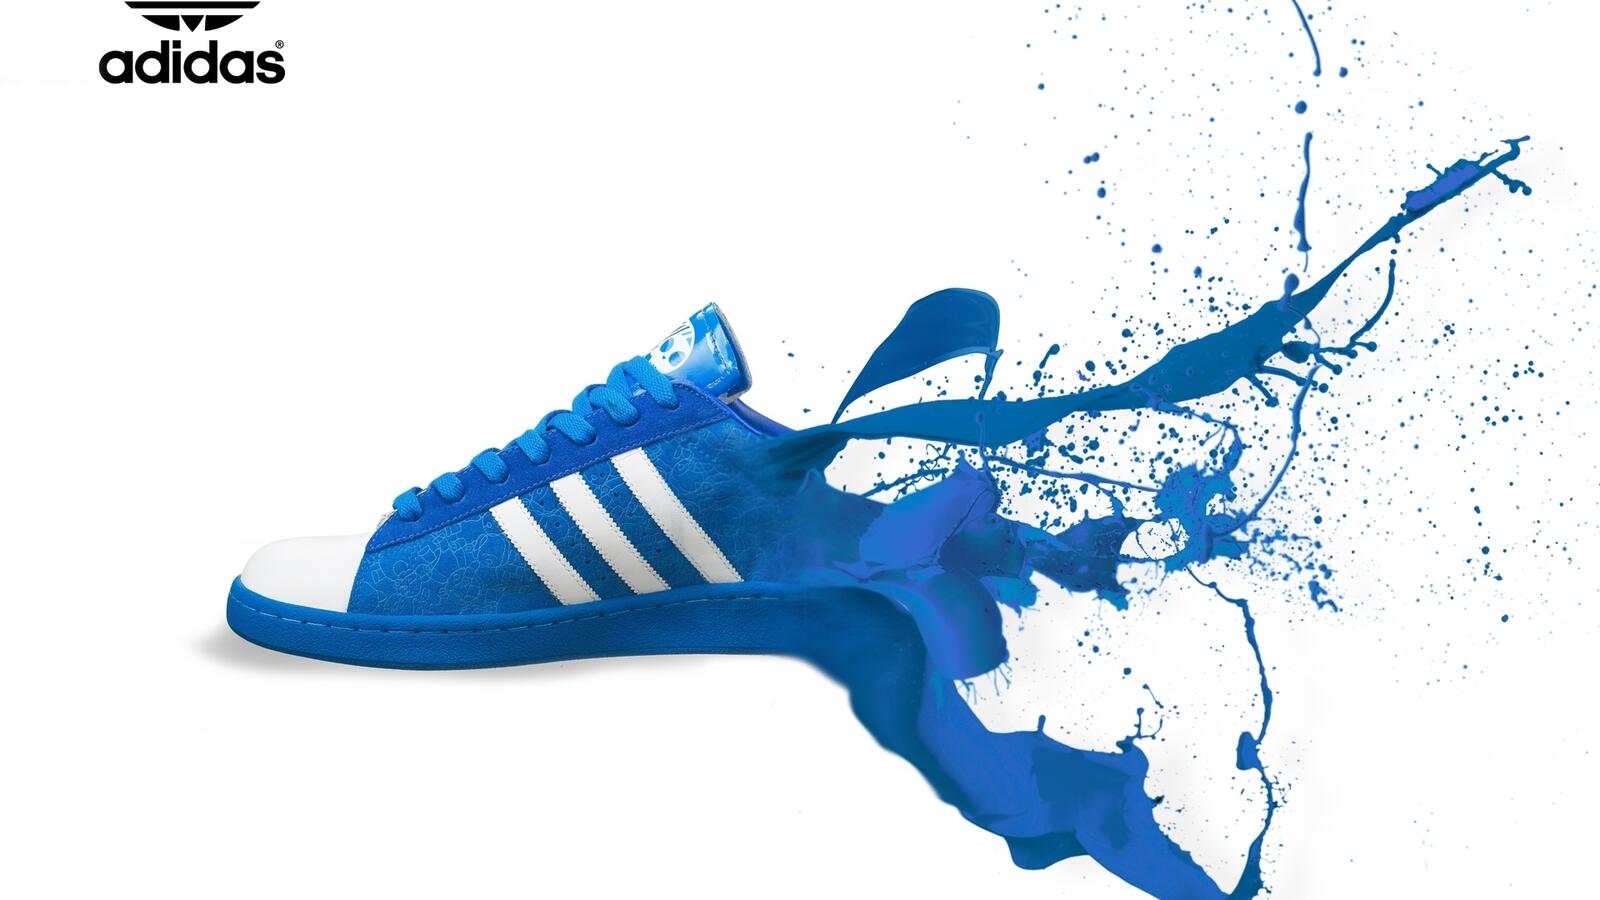 Wallpapers adidas sneakers blue on the desktop